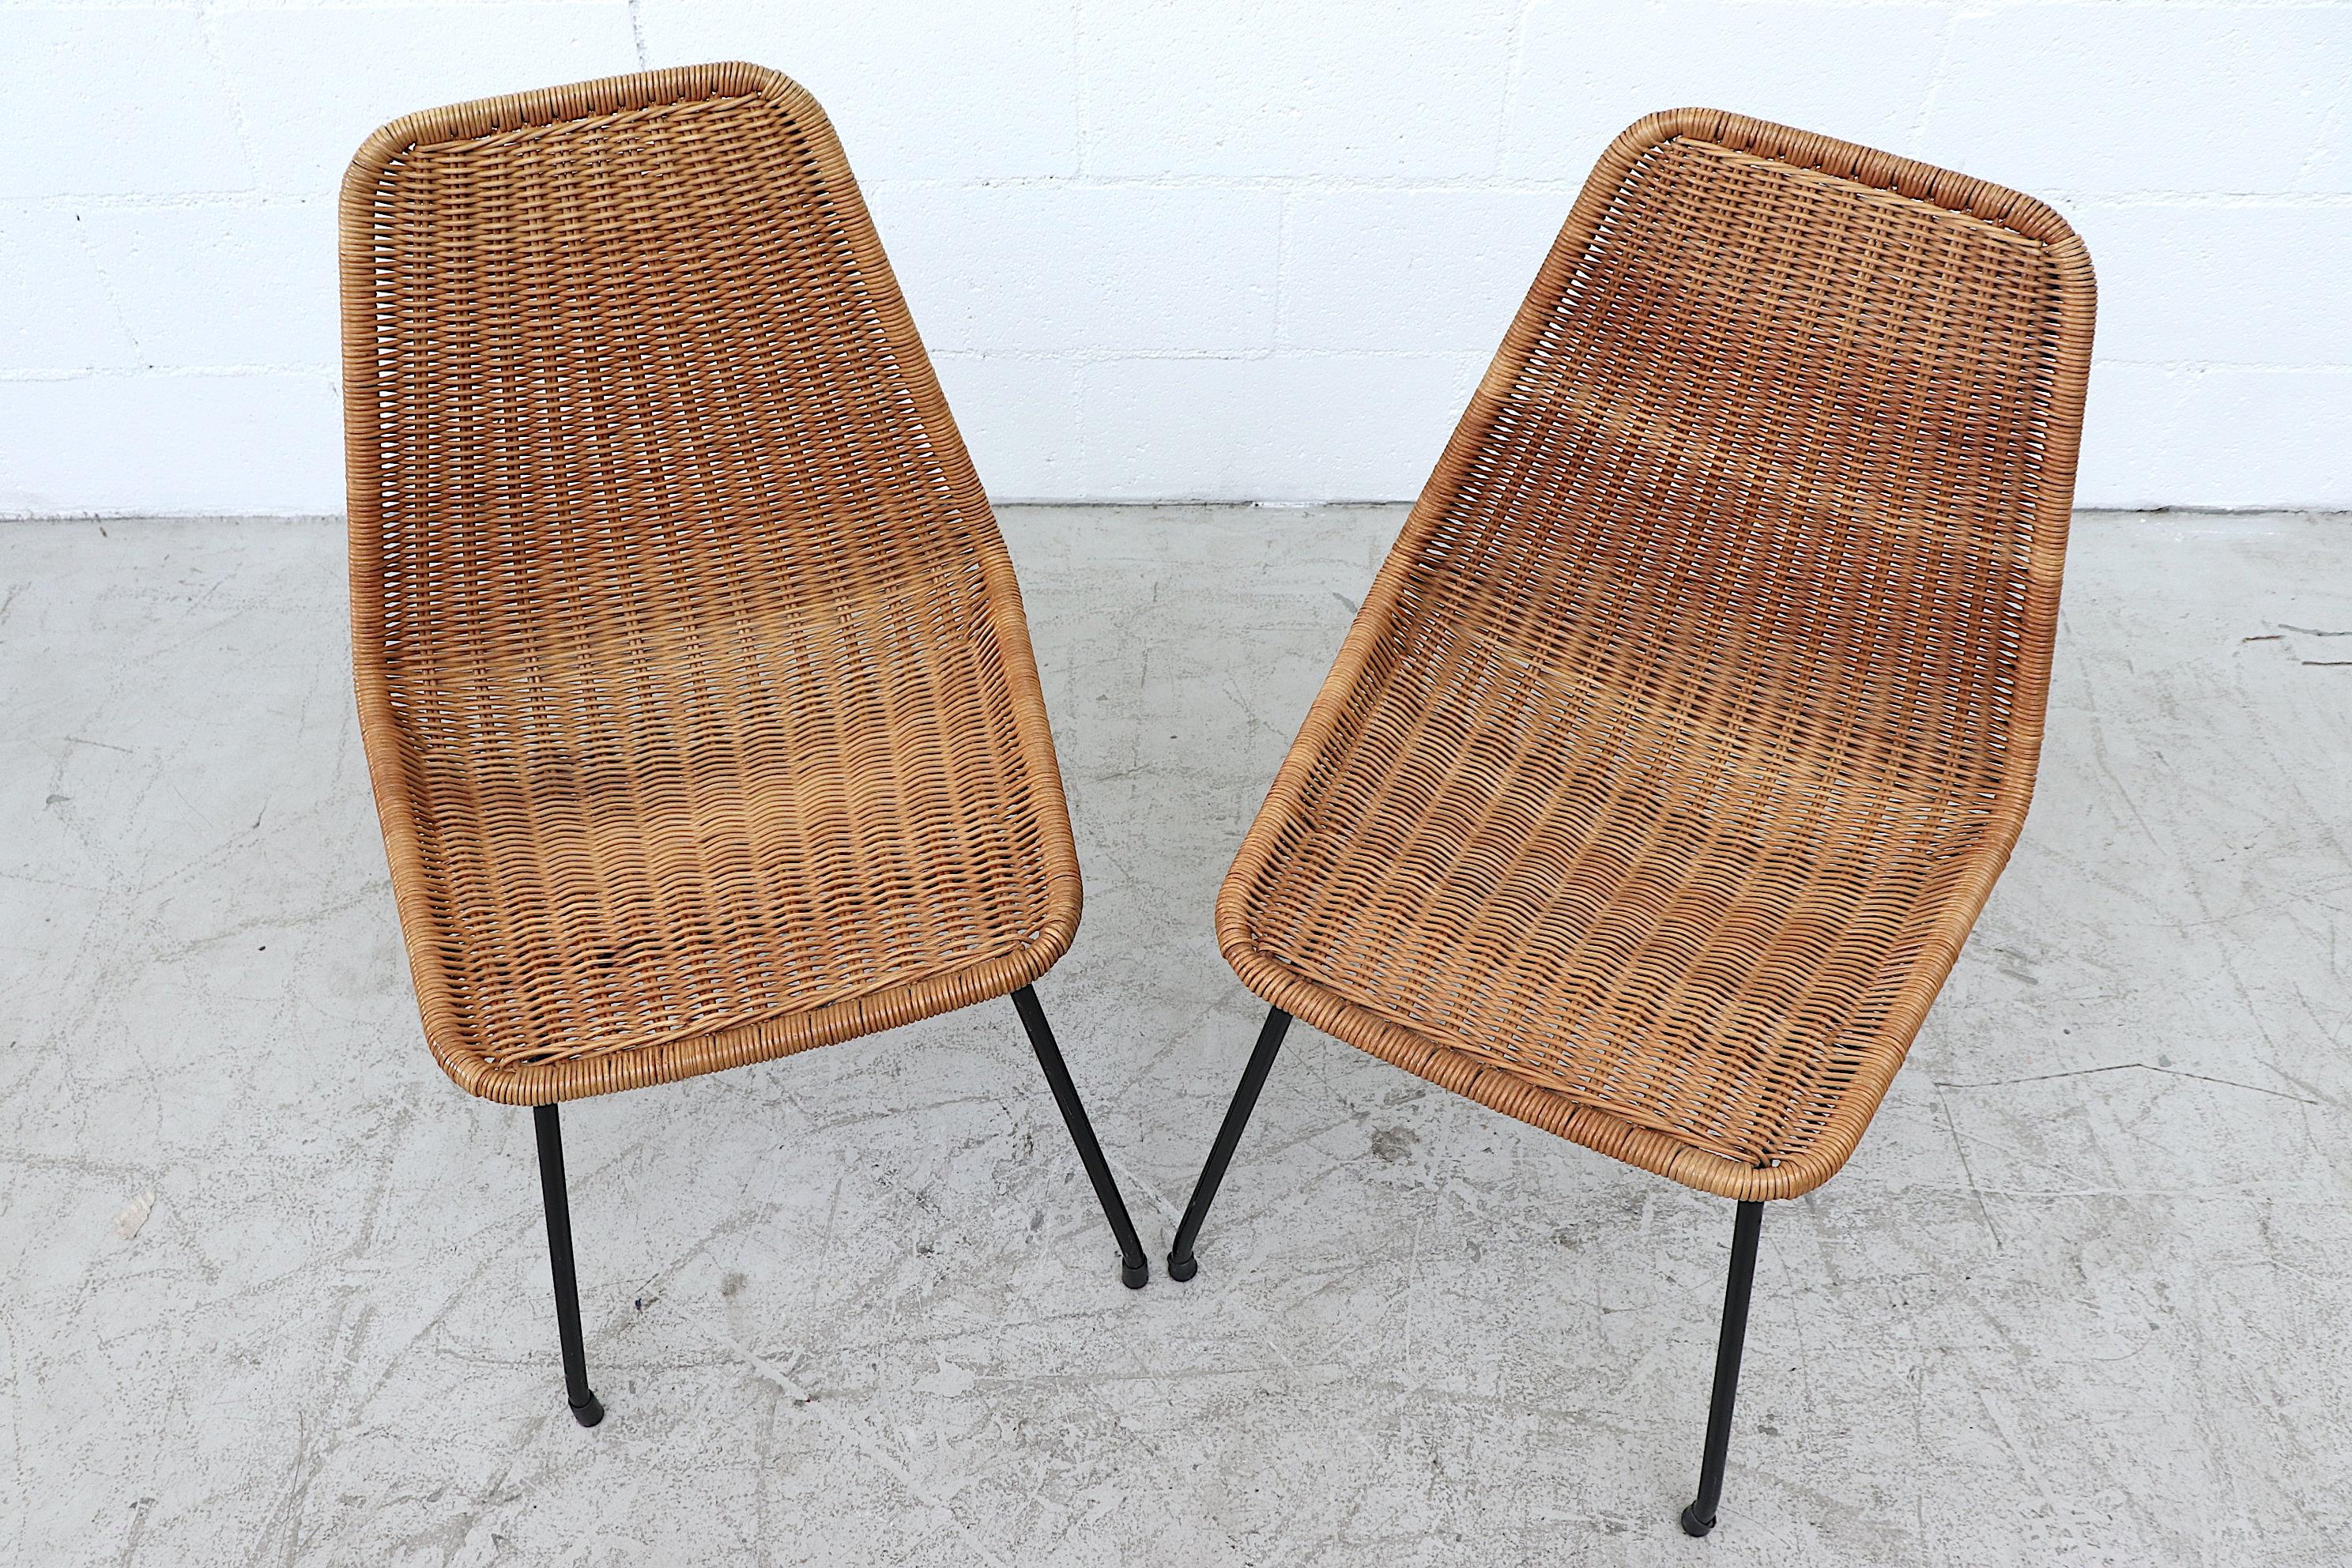 Handsome pair of Dirk van Sliedregt style rattan shell seat chair with black enameled metal frame. In original condition with minimal rattan loss and moderate signs of wear consistent with age and use. Set price.